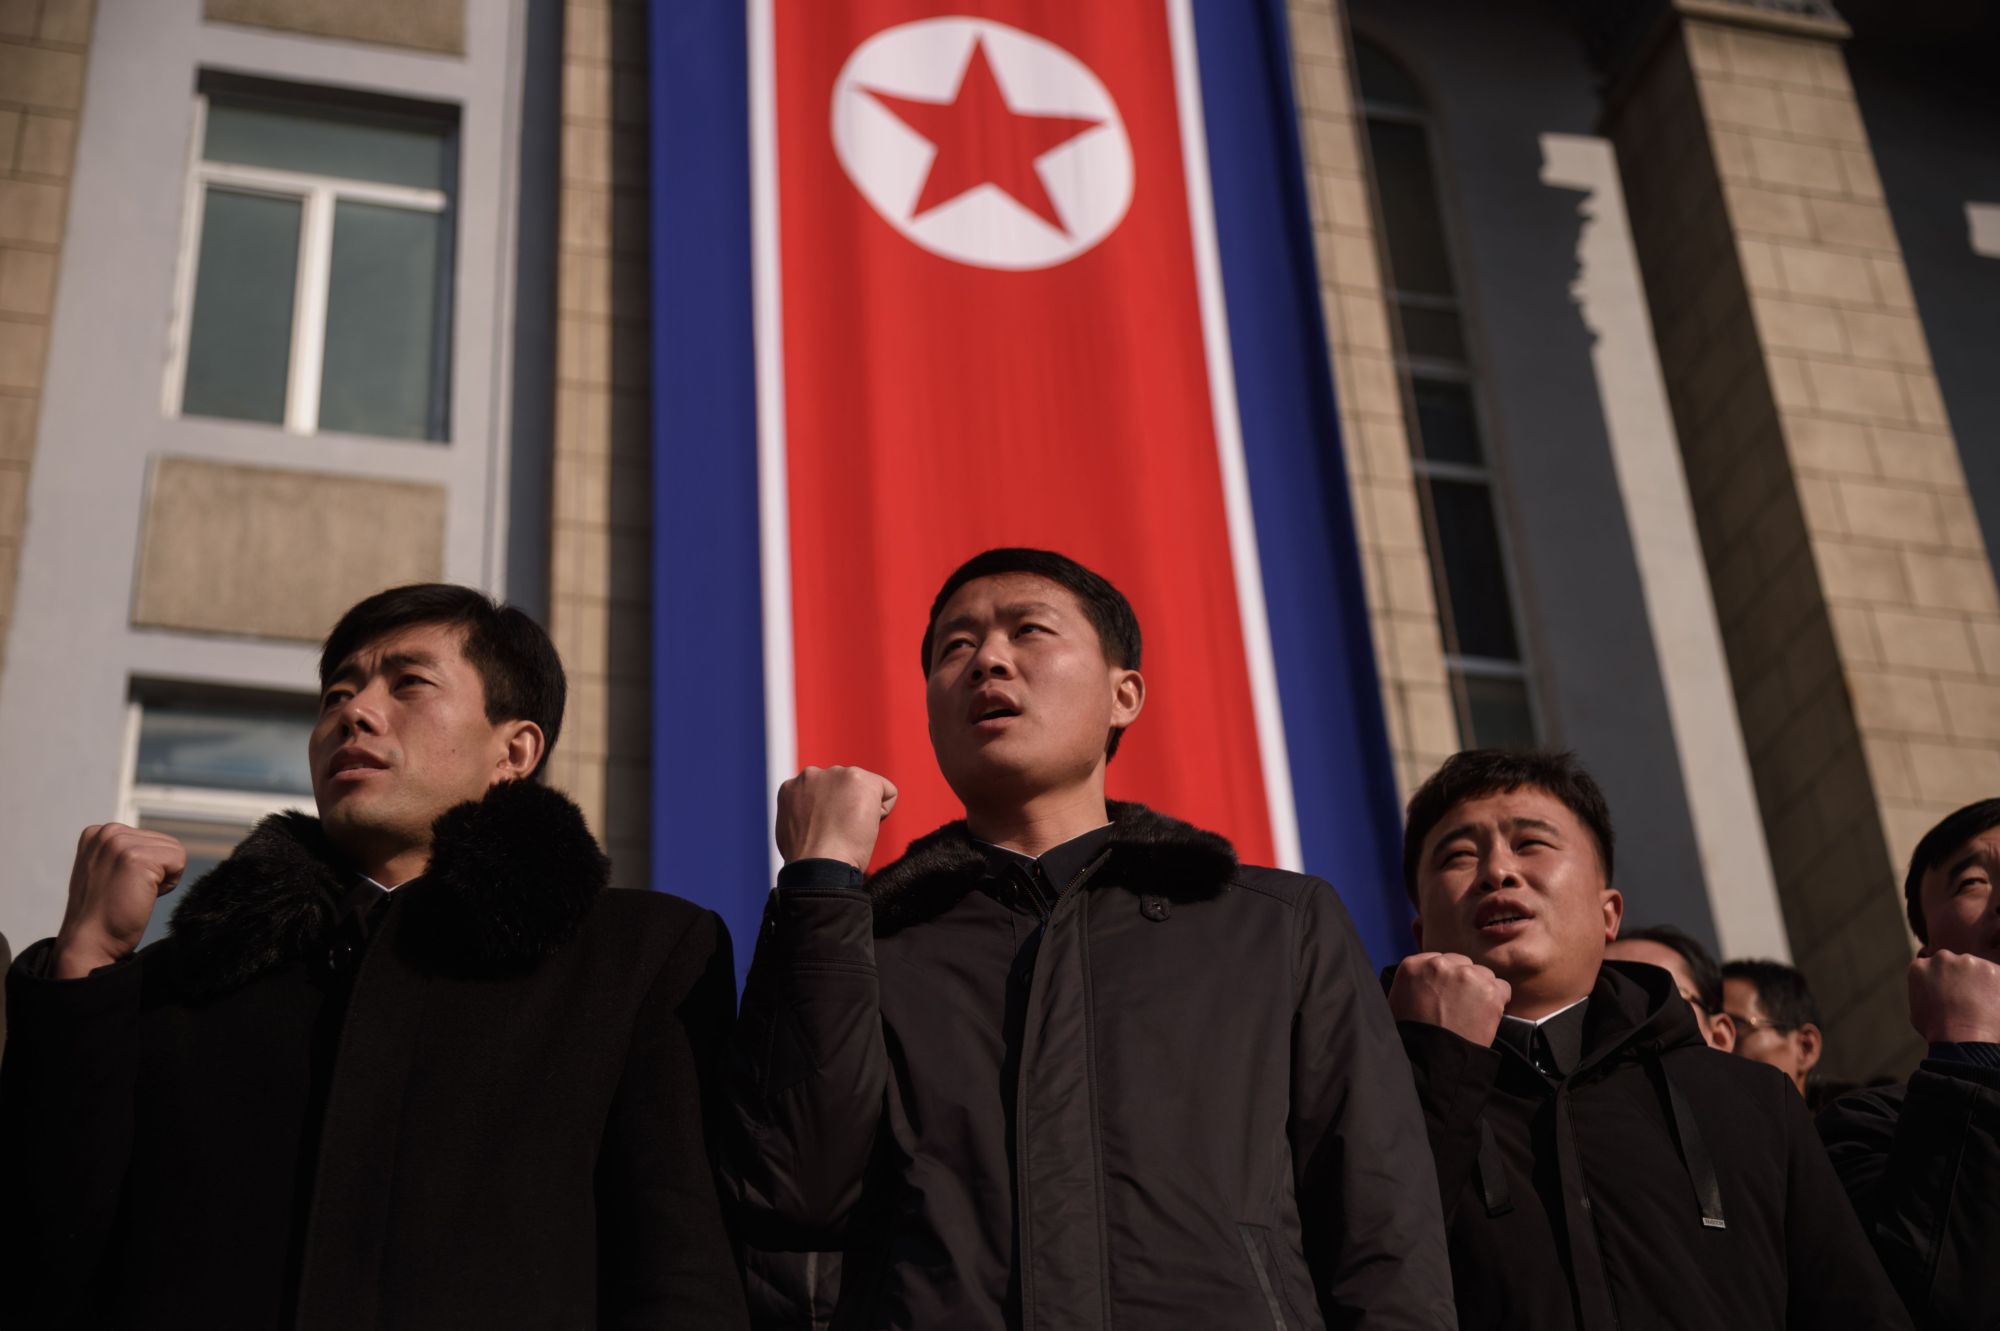 Attendees stand before a North Korean flag during a rally in support of the 5th Plenary Meeting of the 7th Central Committee of the Workers' Party of Korea at Kim Il Sung Square in Pyongyang on Jan. 5. | AFP-JIJI